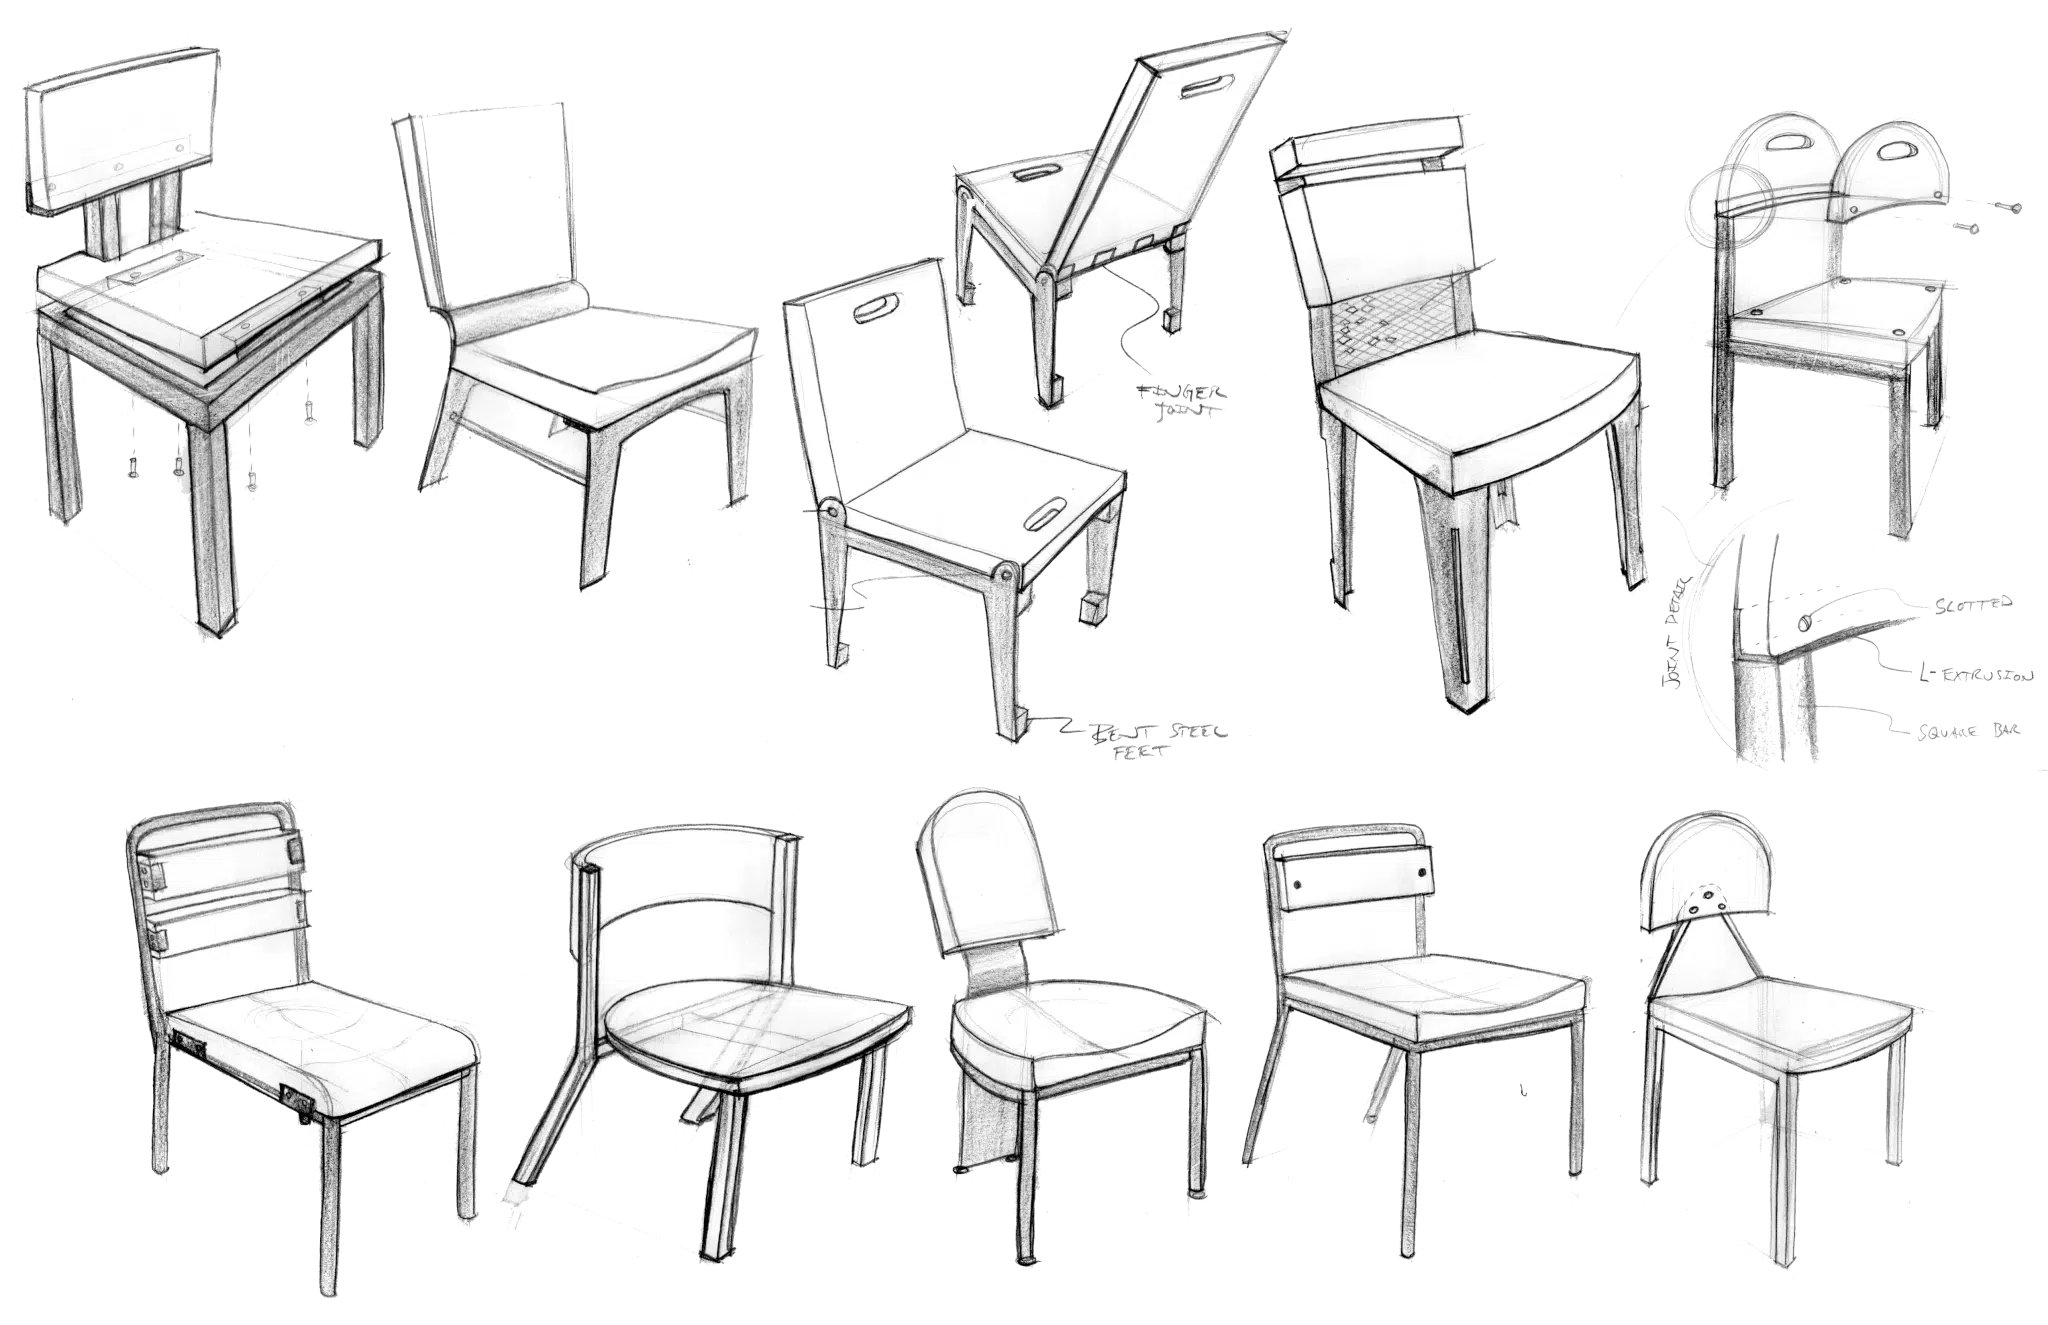 Chair design concepts sketched